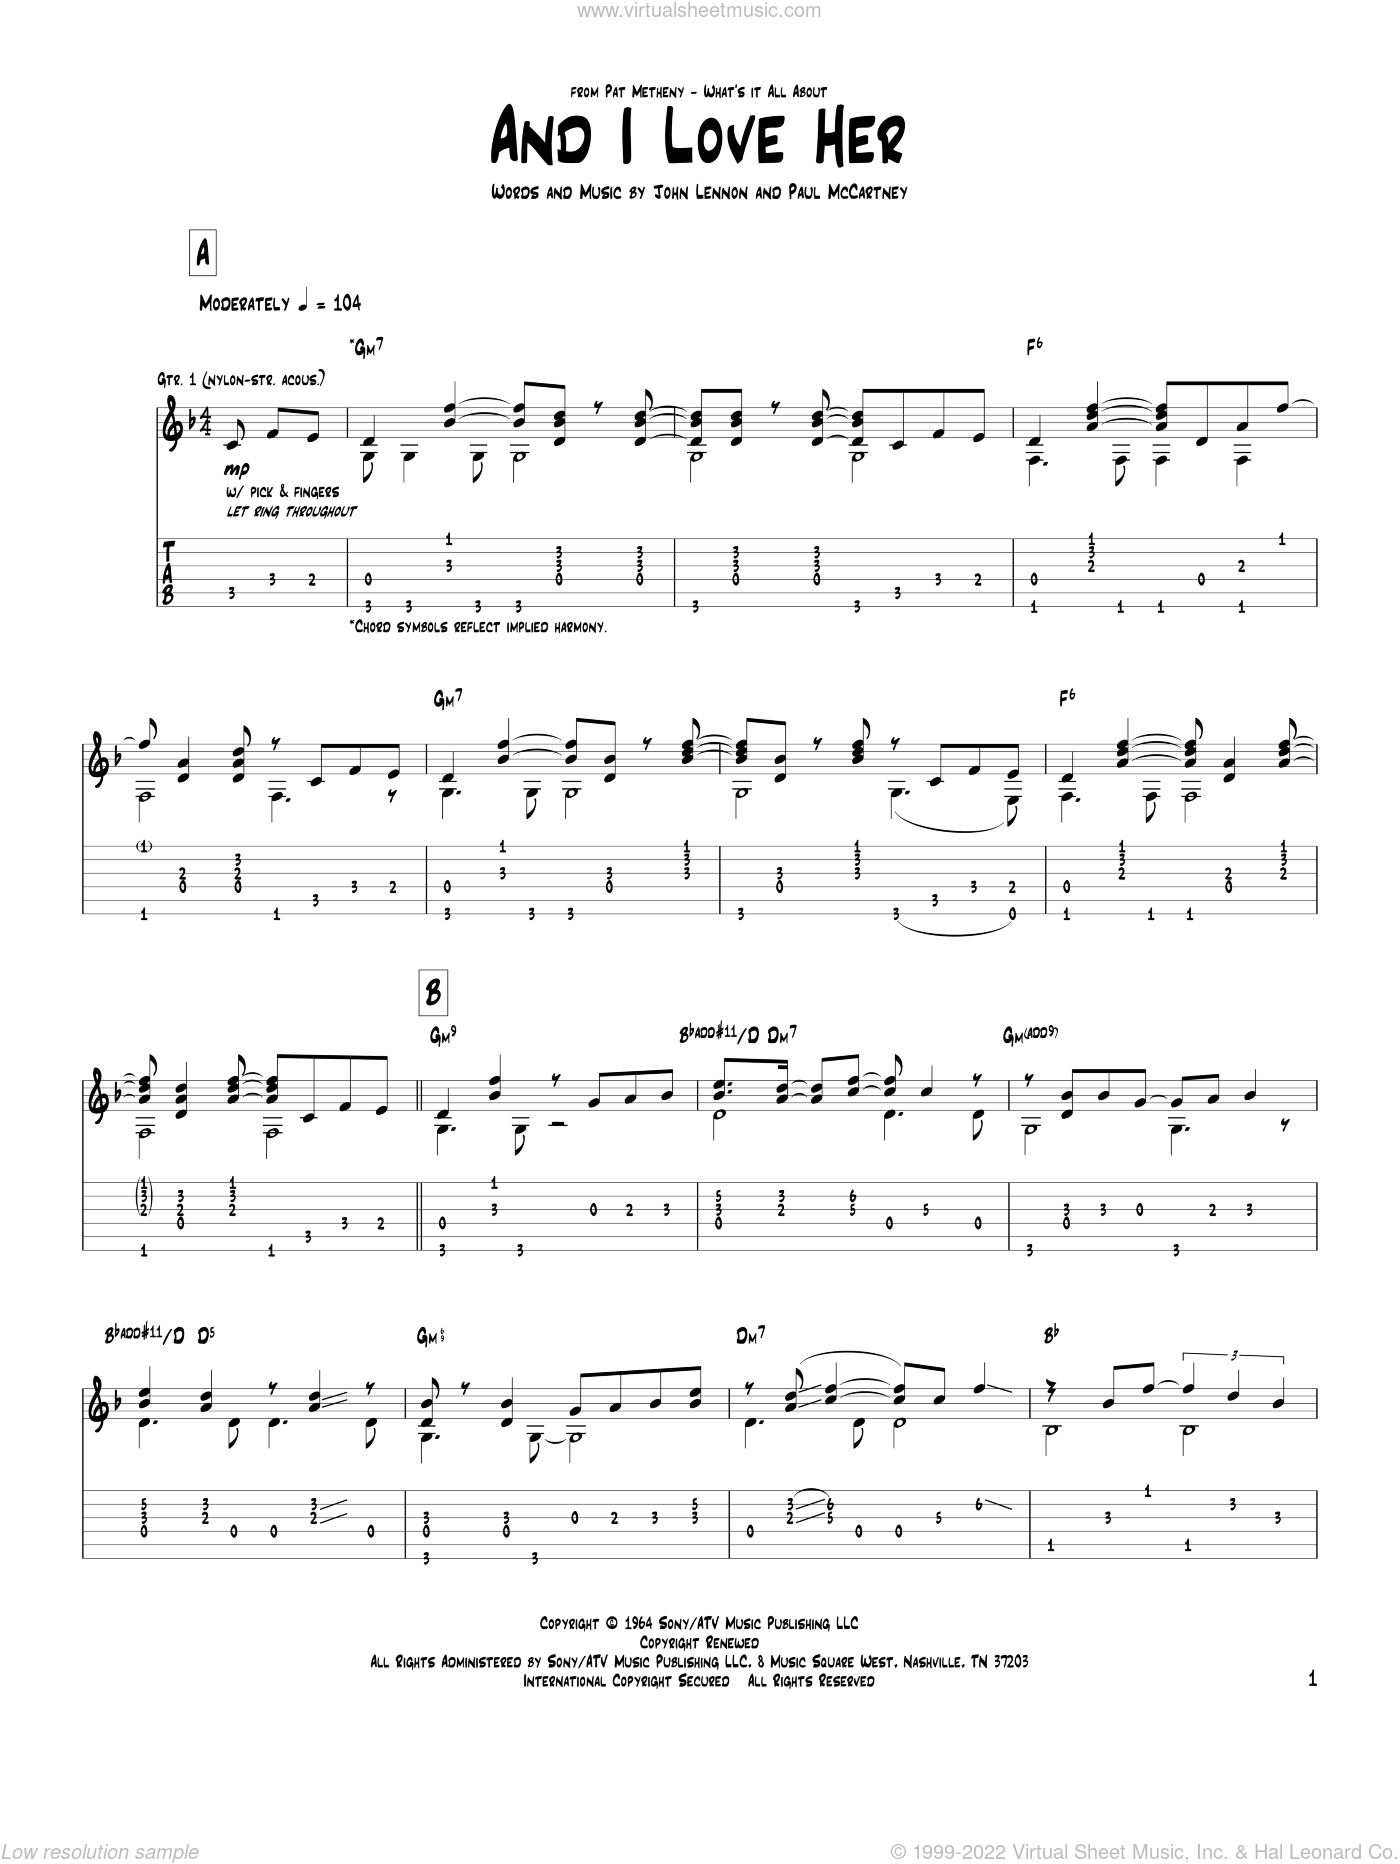 Metheny And I Love Her Sheet Music For Guitar Tablature Pdf